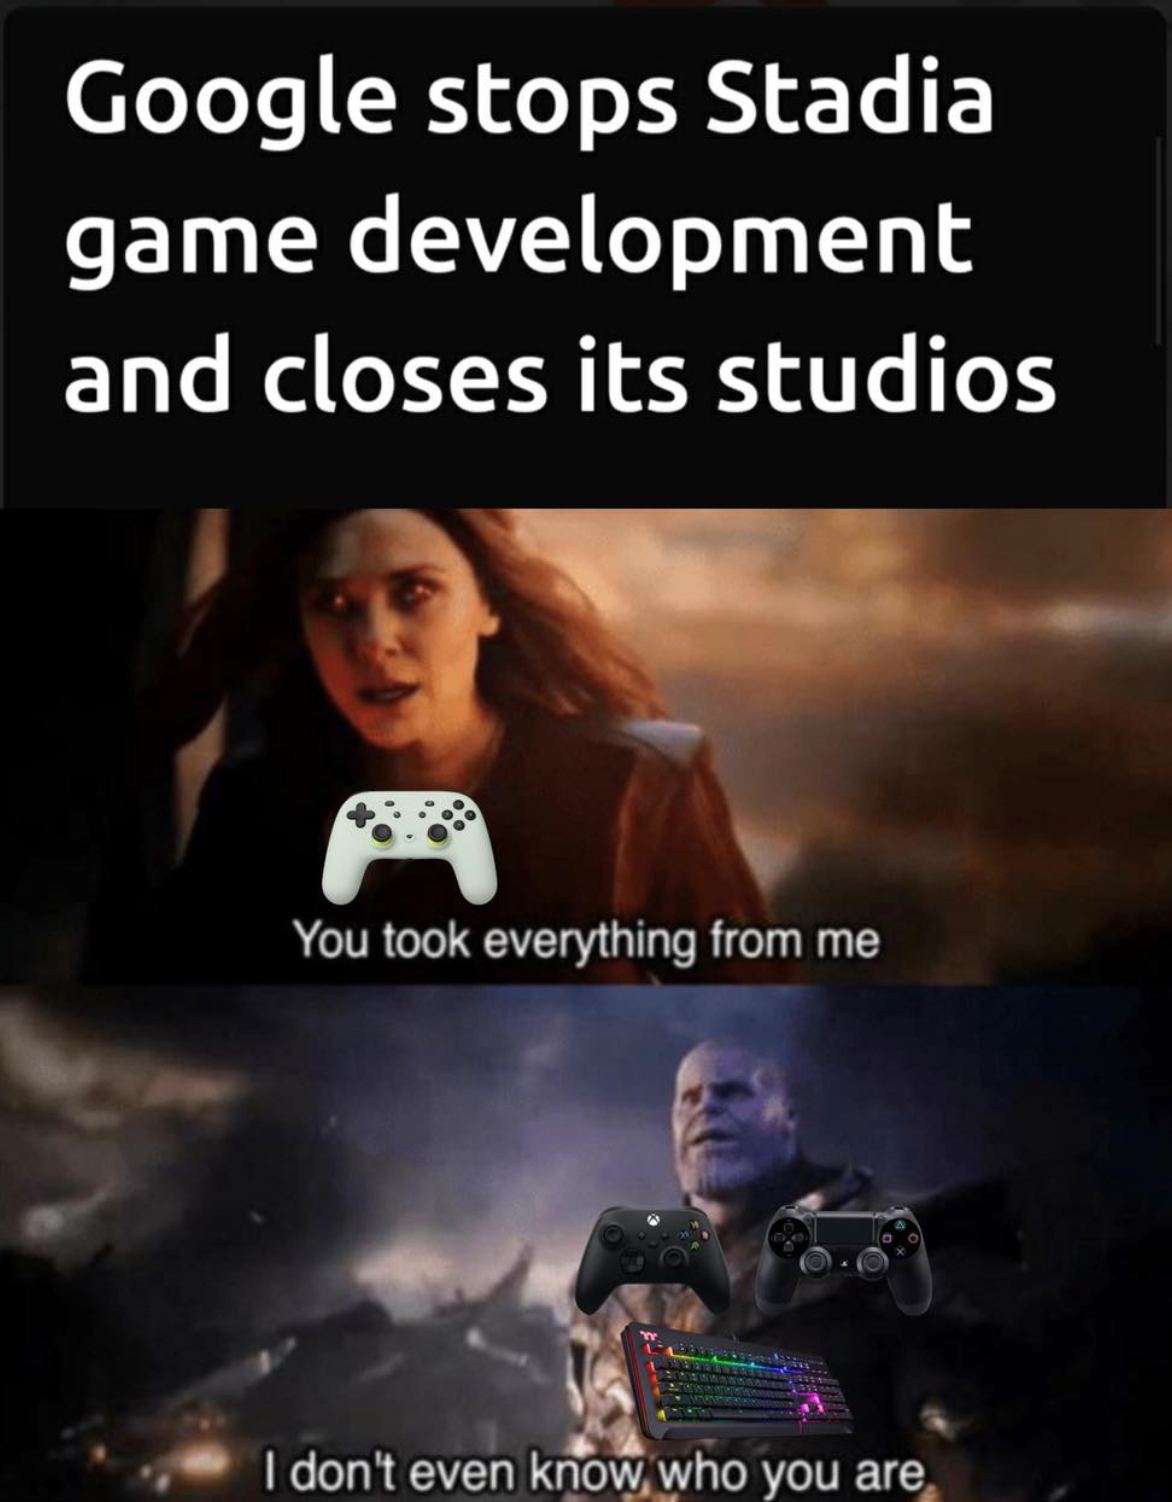 gaming memes - you took everything from me among us - Google stops Stadia game development and closes its studios You took everything from me I don't even know who you are